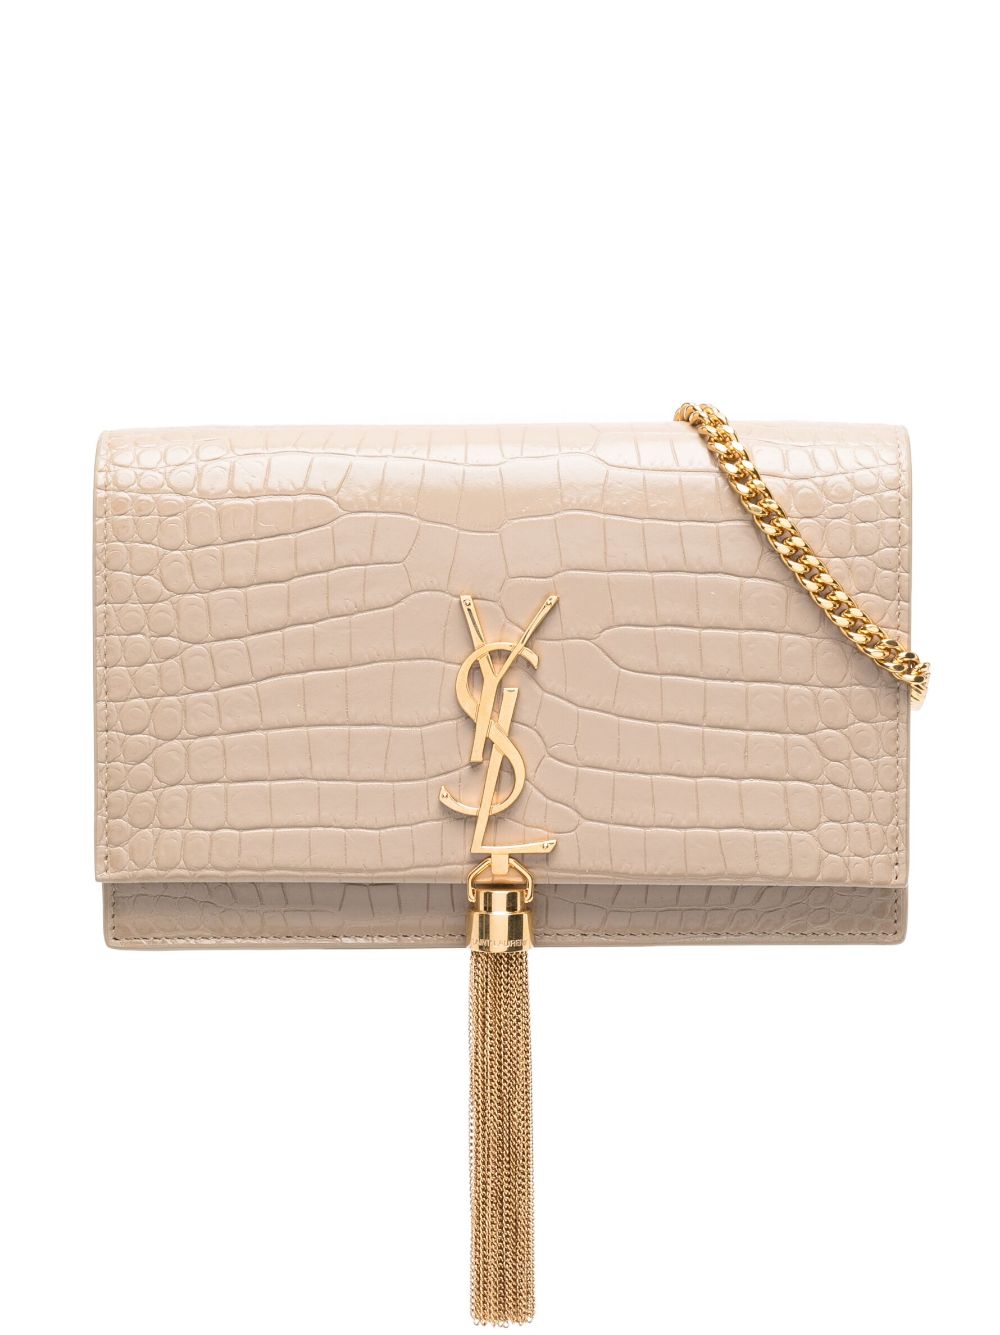 Saint Laurent Small Kate Leather Clutch Bag In Neutrals